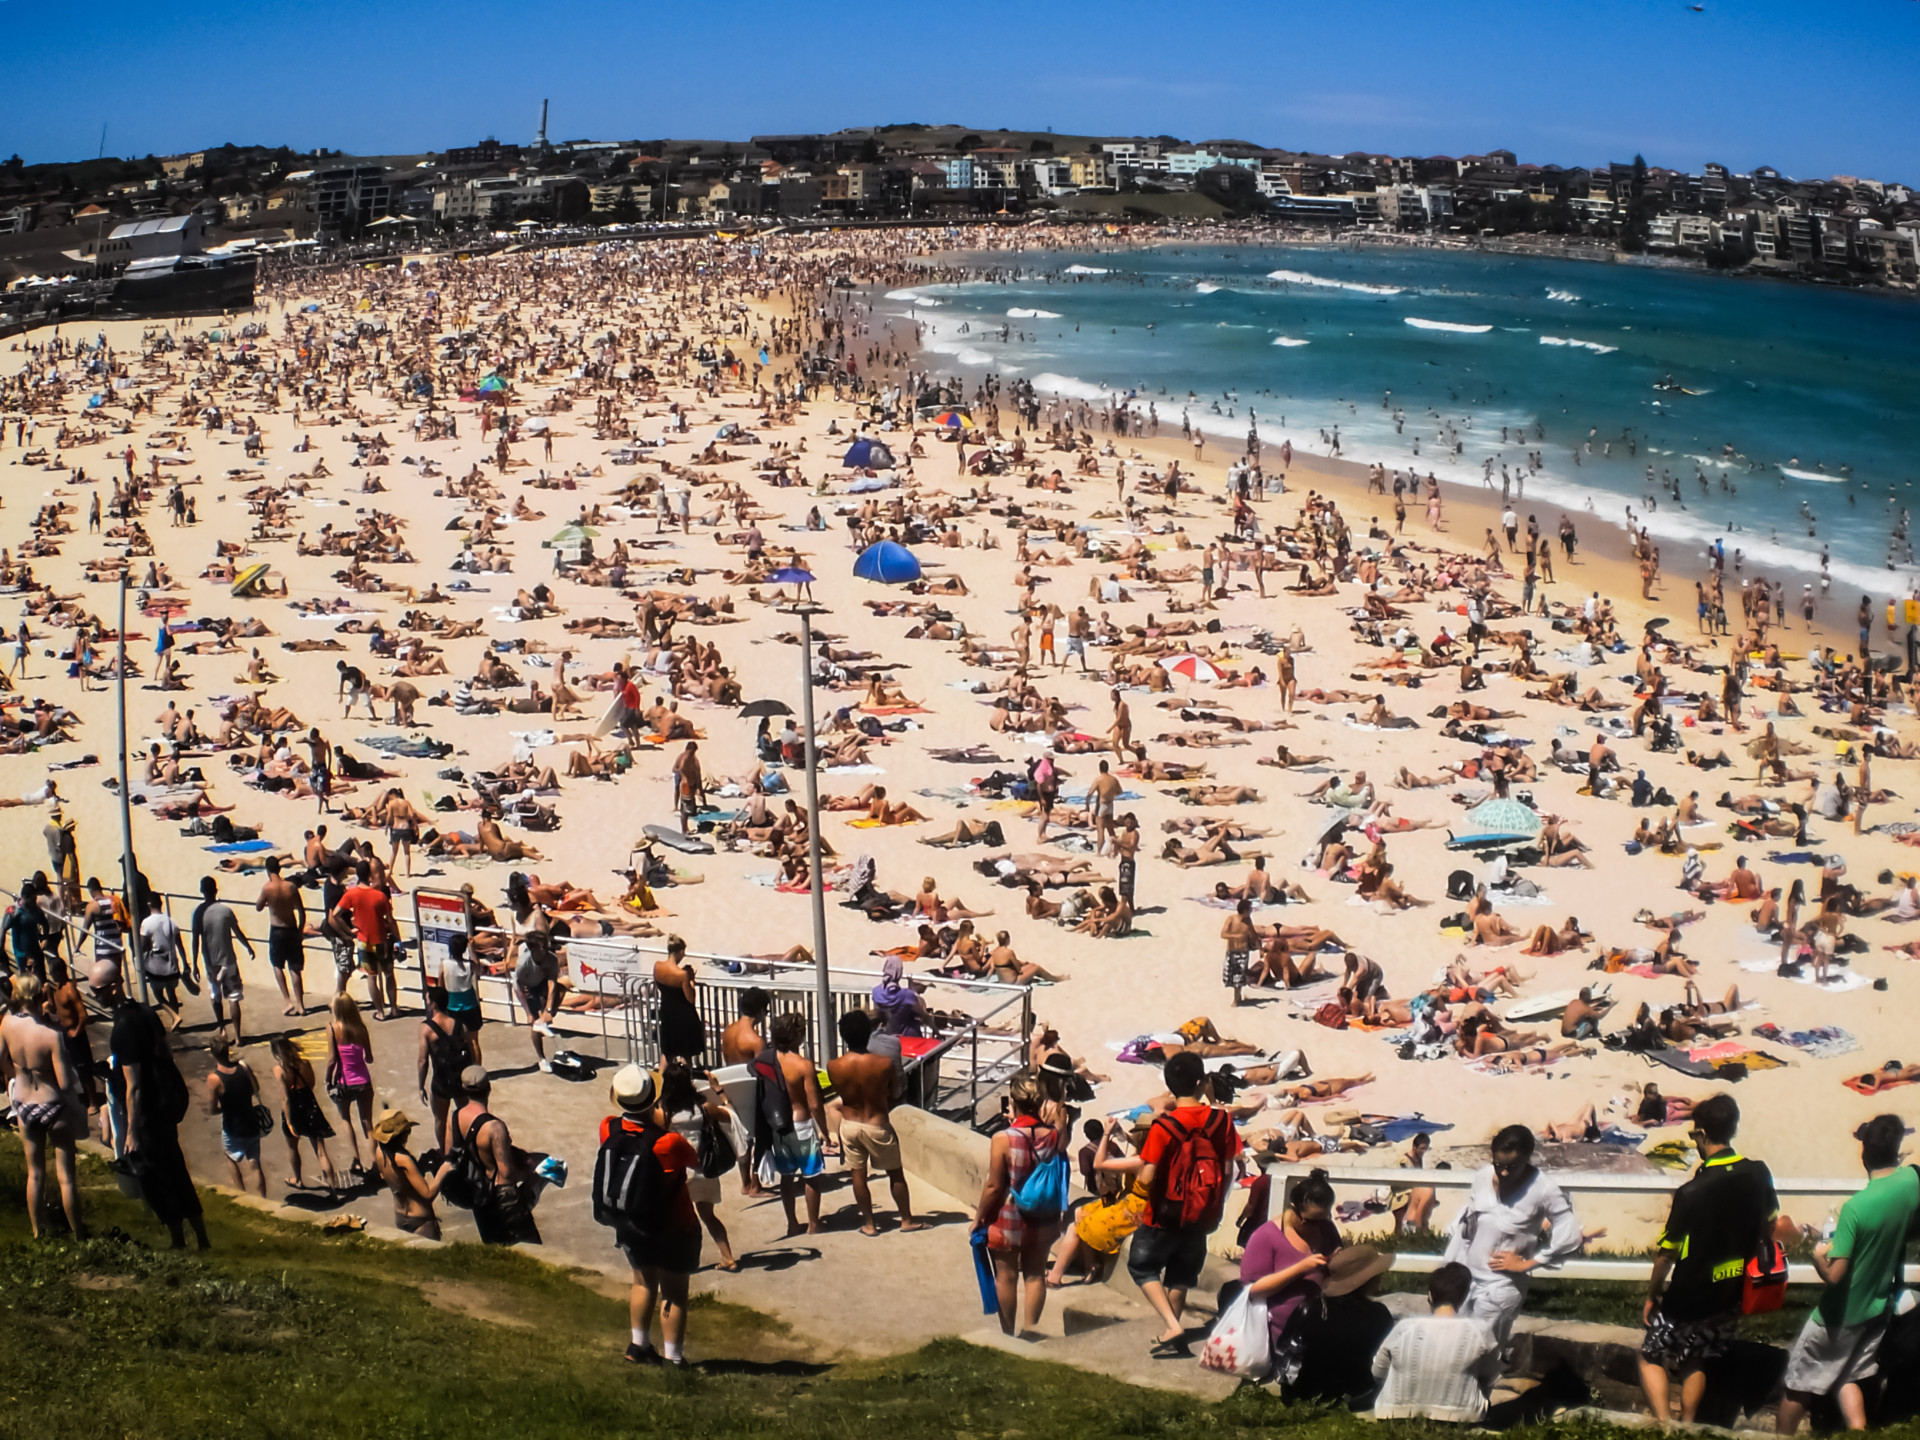 <p>Score: 7.057</p> <p>Australians are satisfied with their well-being, have jobs, and have a high life expectancy. Incredible beaches also help, right?</p><p>You may also like:<a href="https://www.starsinsider.com/n/384084?utm_source=msn.com&utm_medium=display&utm_campaign=referral_description&utm_content=690305en-ca"> Arnold Schwarzenegger's best movies... and his worst!</a></p>